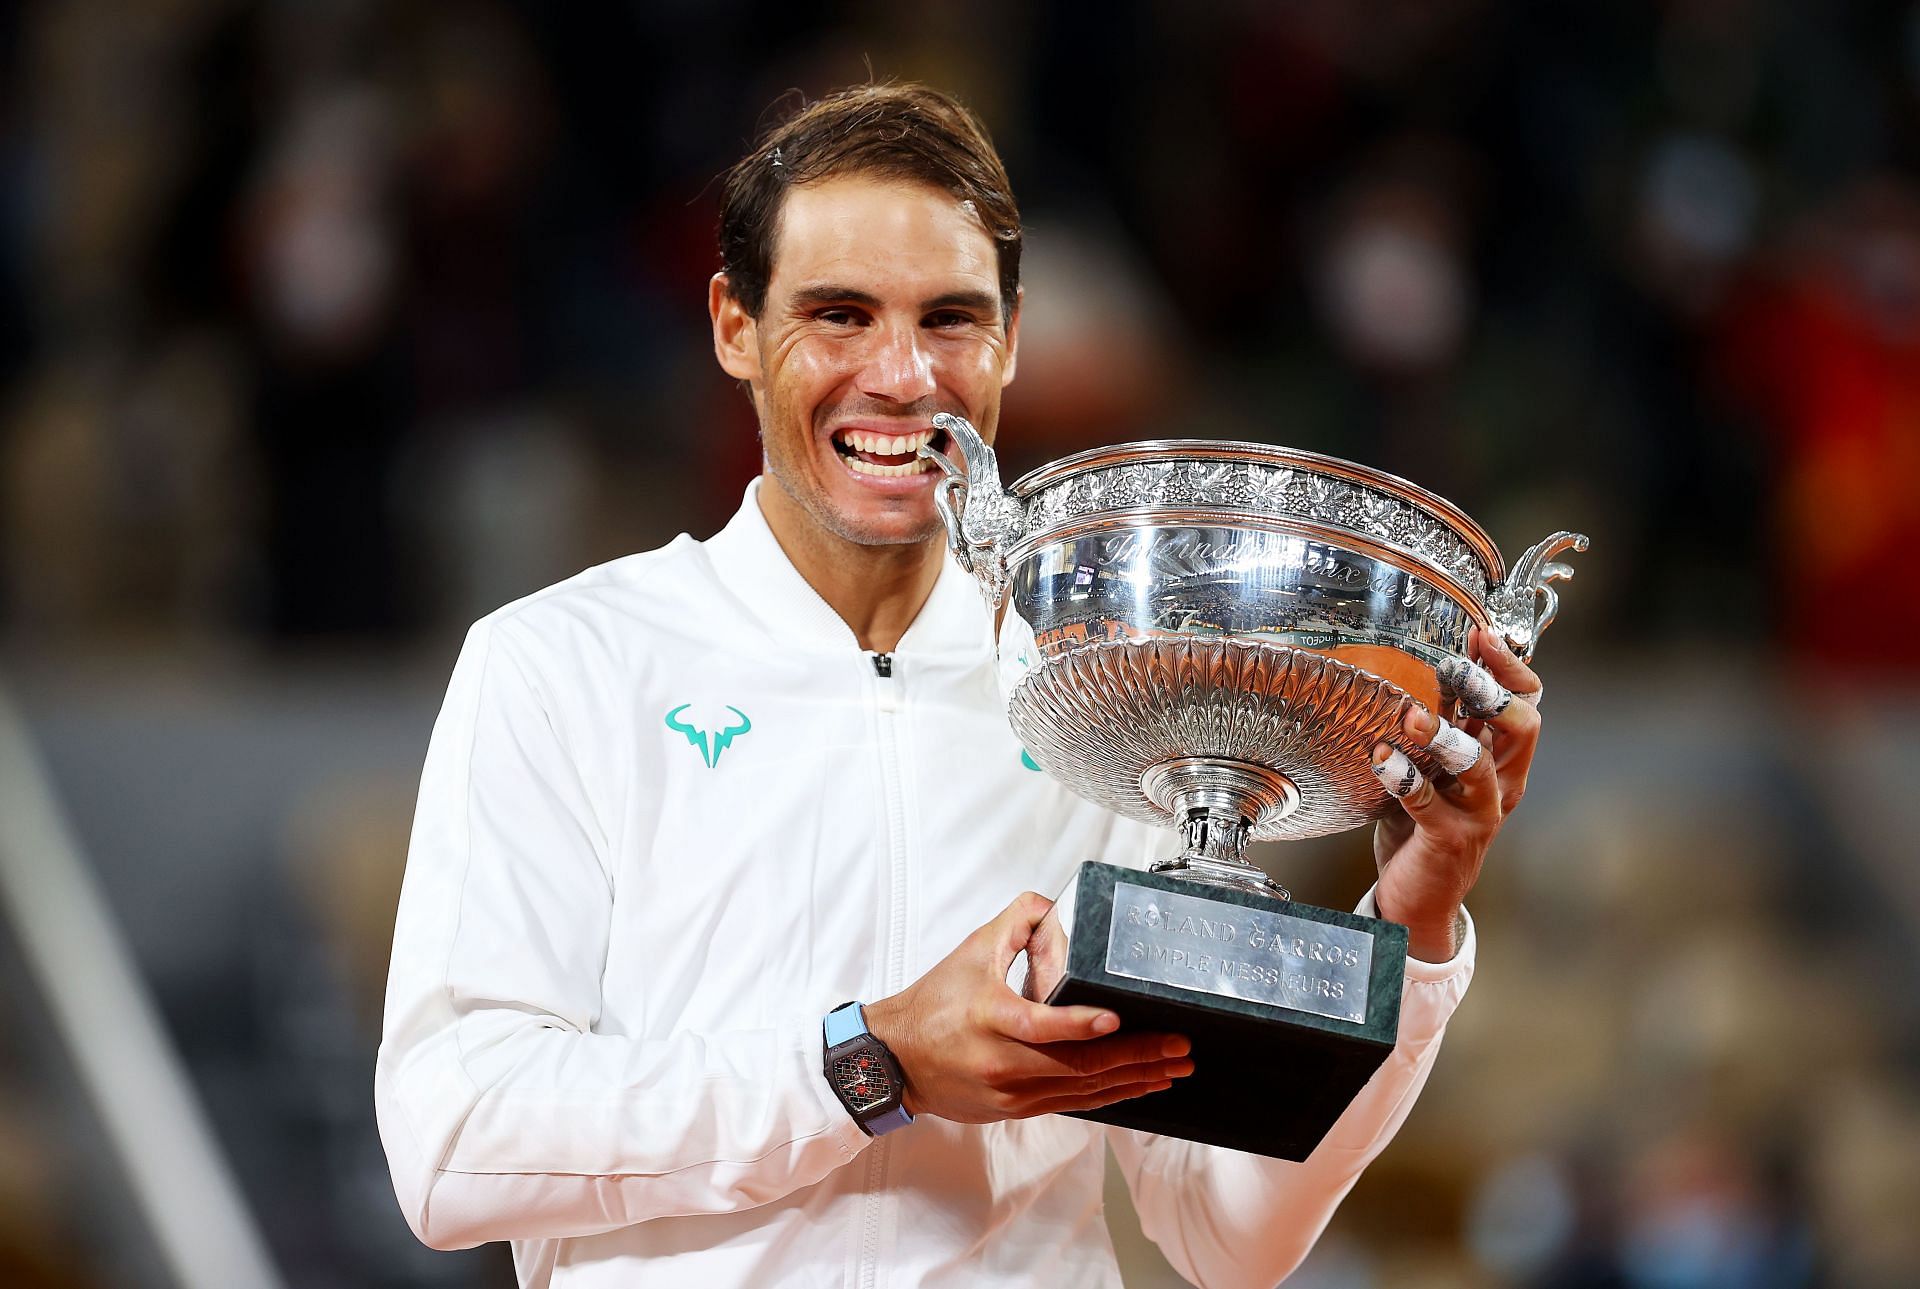 He won his 20th Grand Slam title at the 2020 French Open.